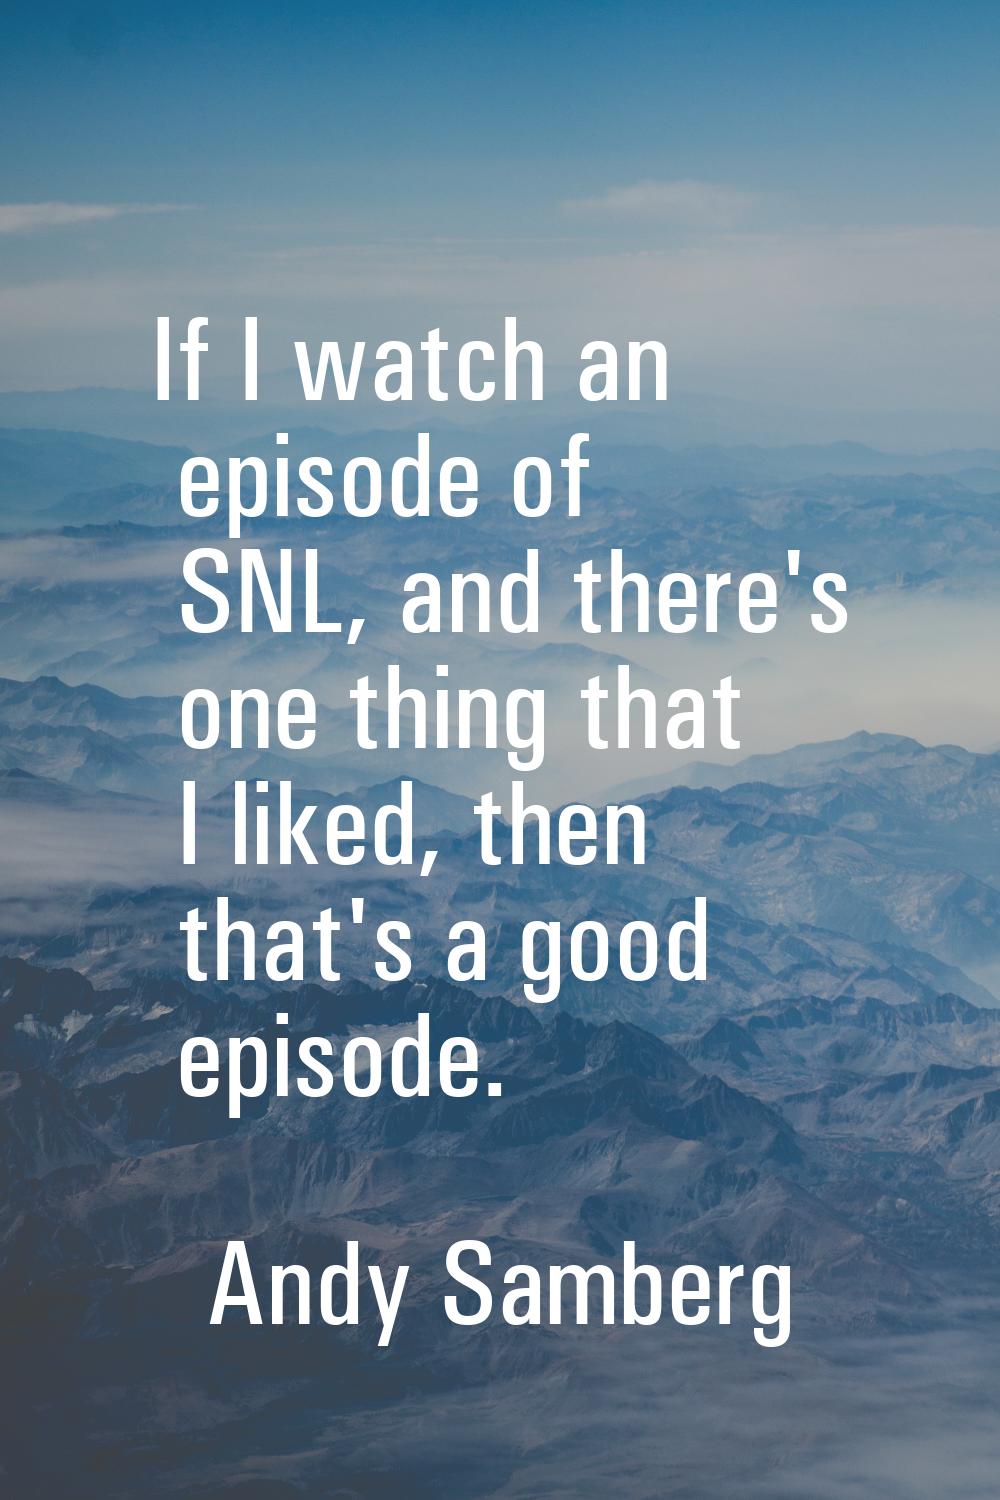 If I watch an episode of SNL, and there's one thing that I liked, then that's a good episode.